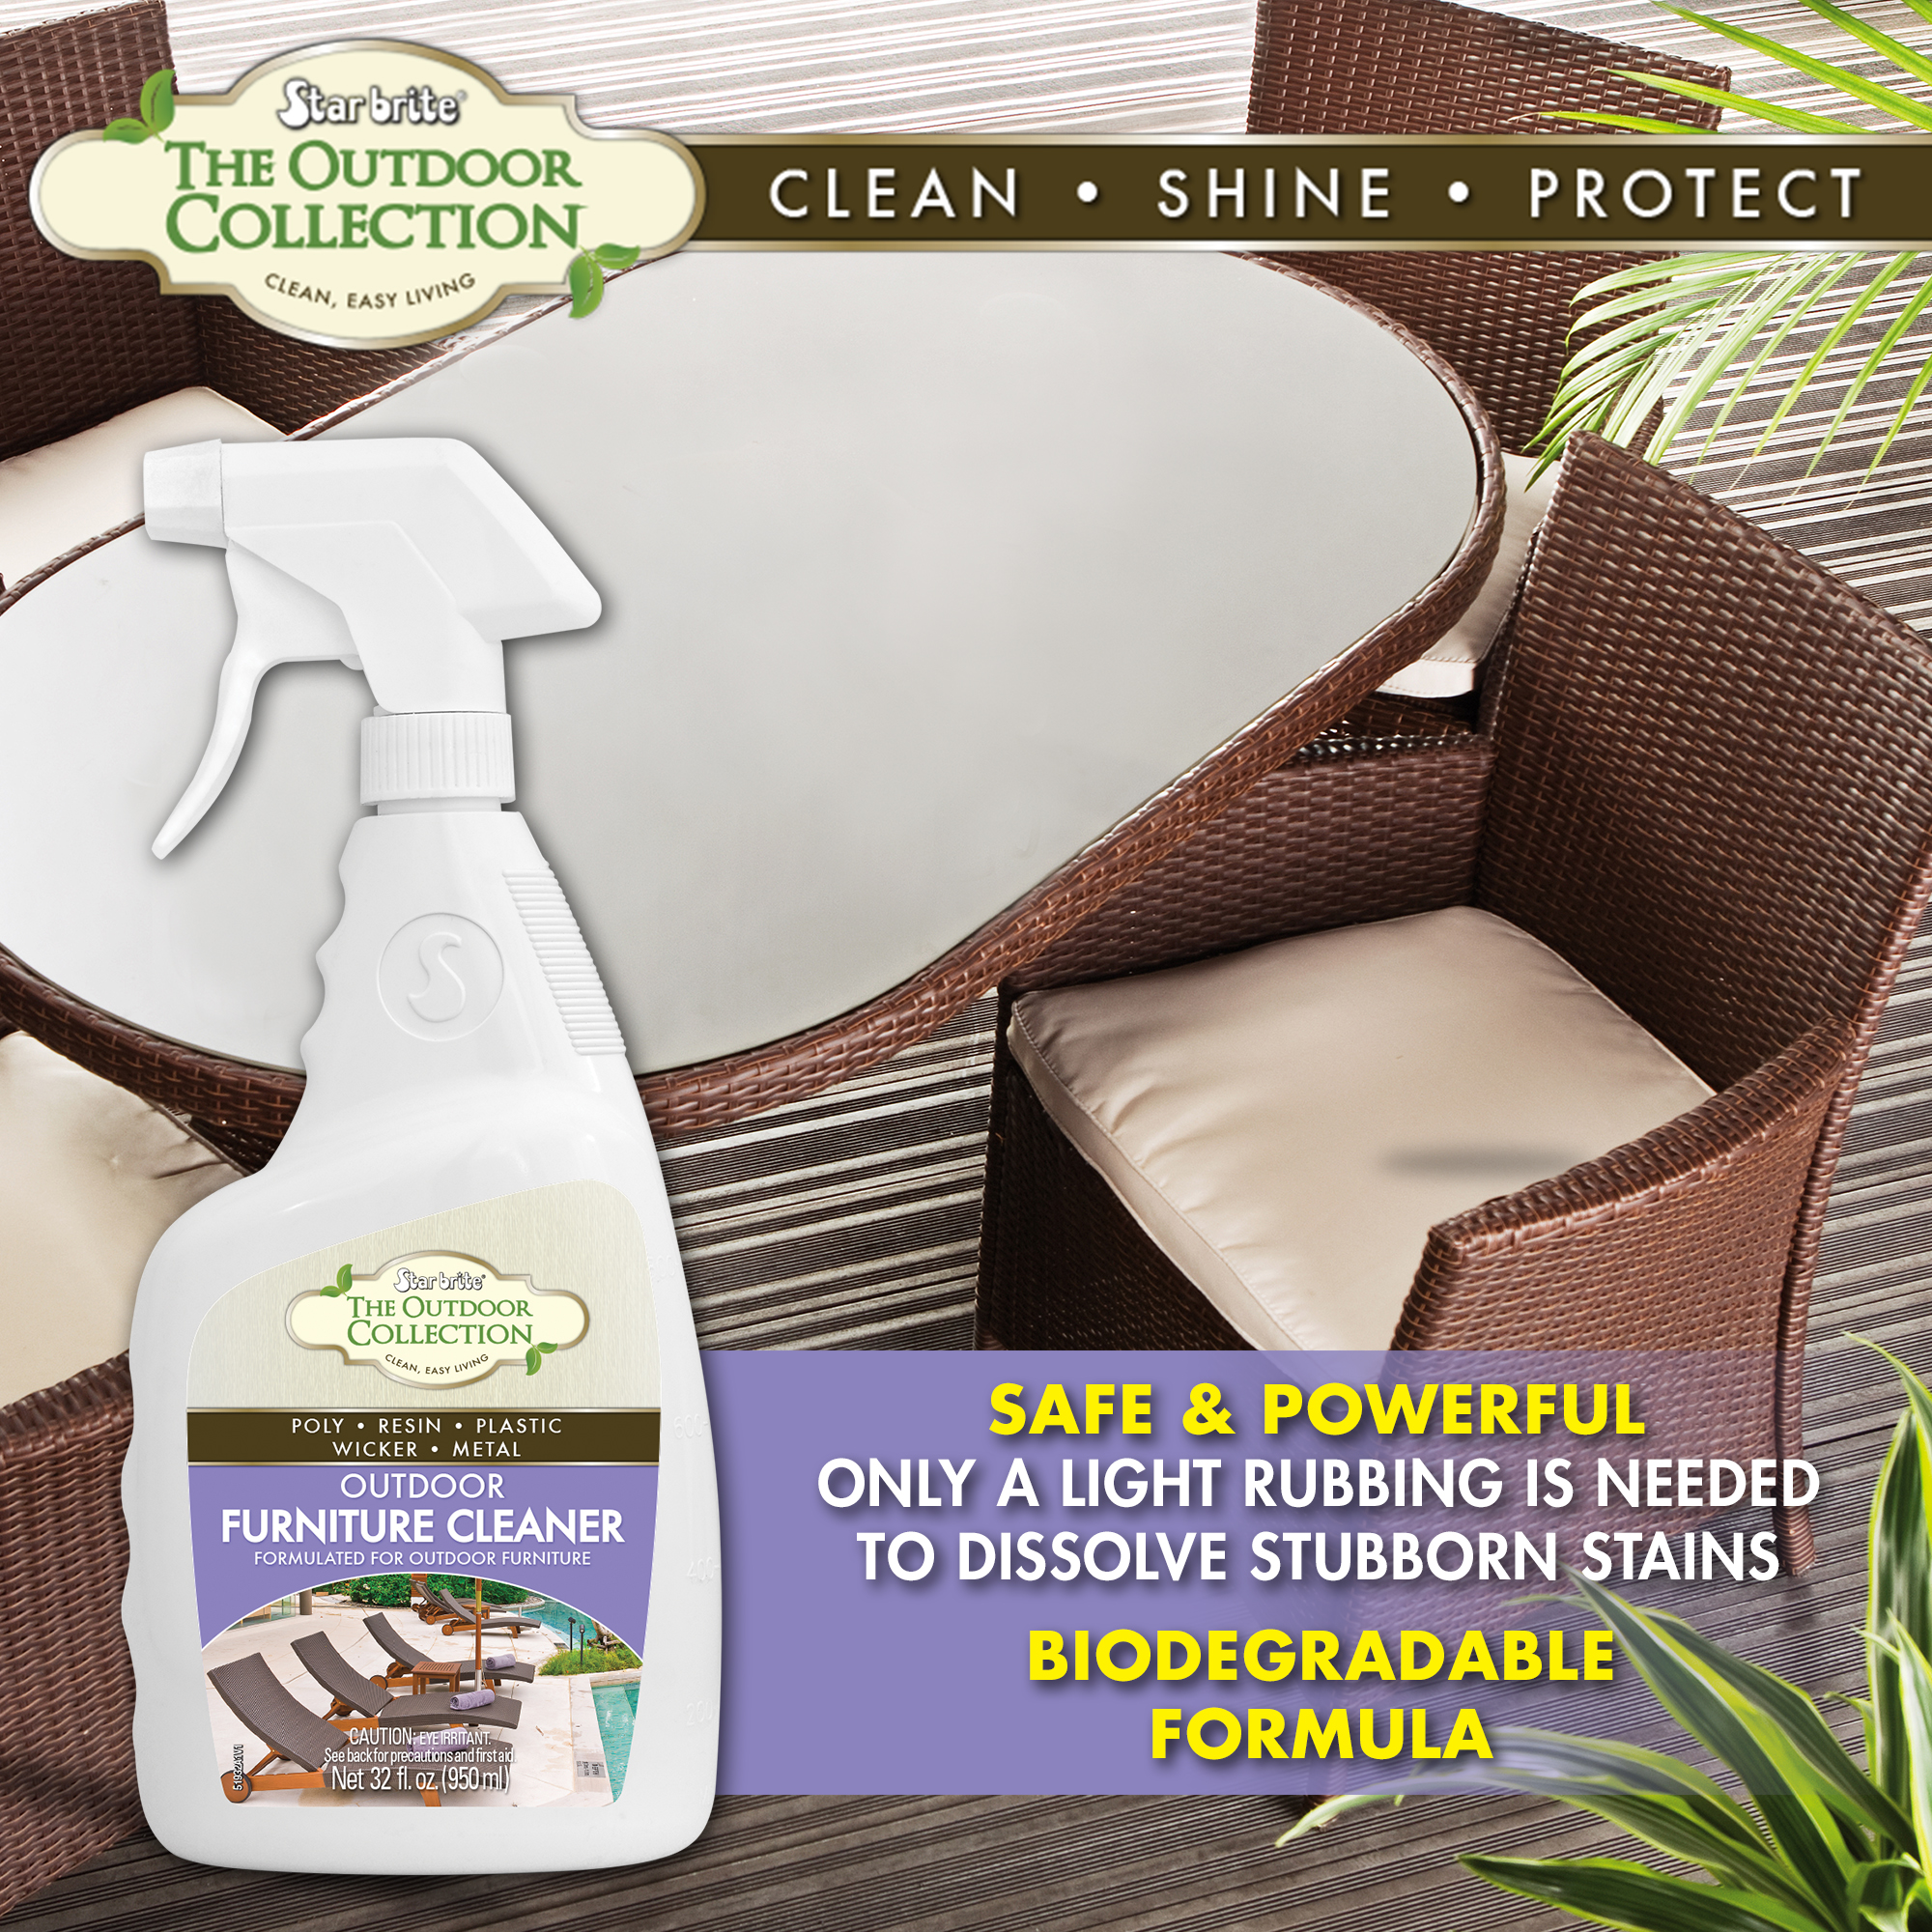 Heavy duty fabric cleaner